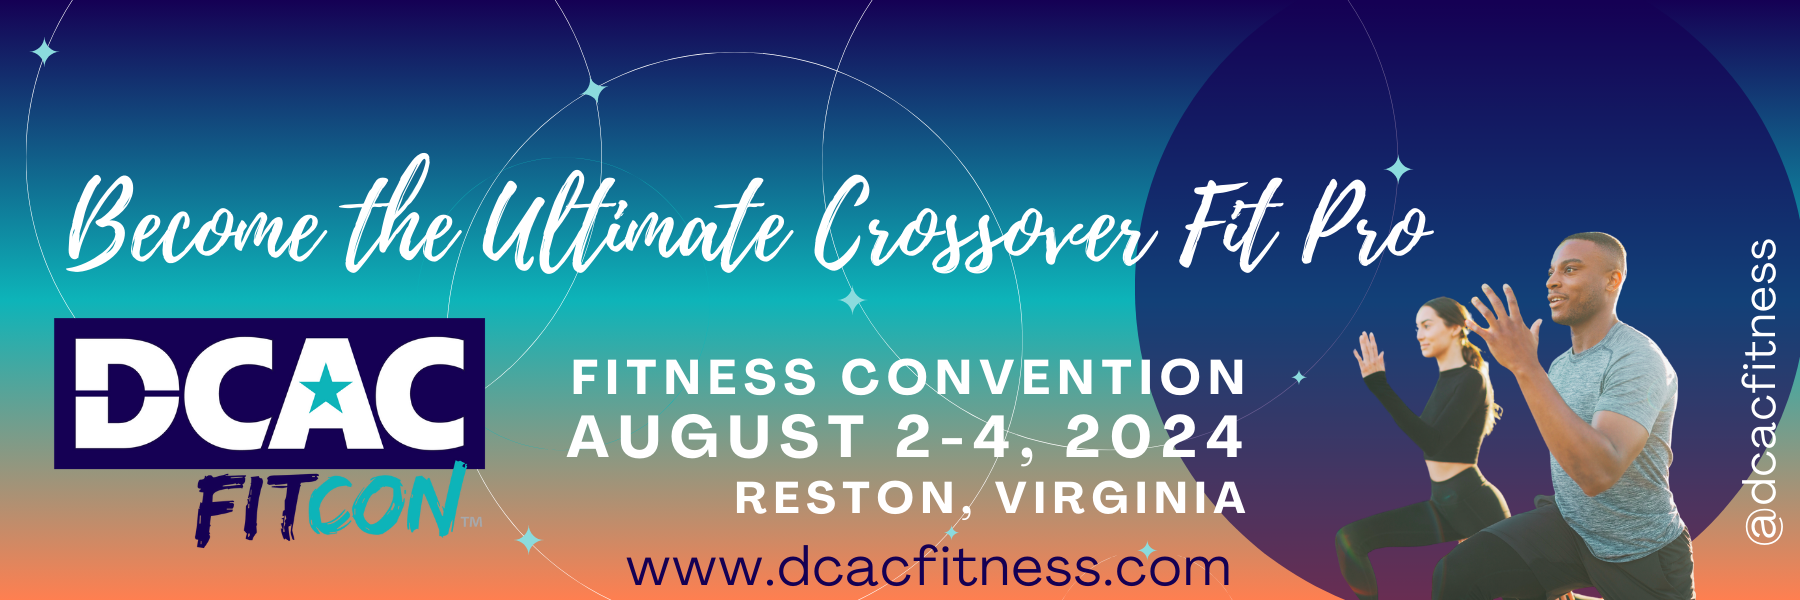 Home Page - DCAC Fitness Conventions